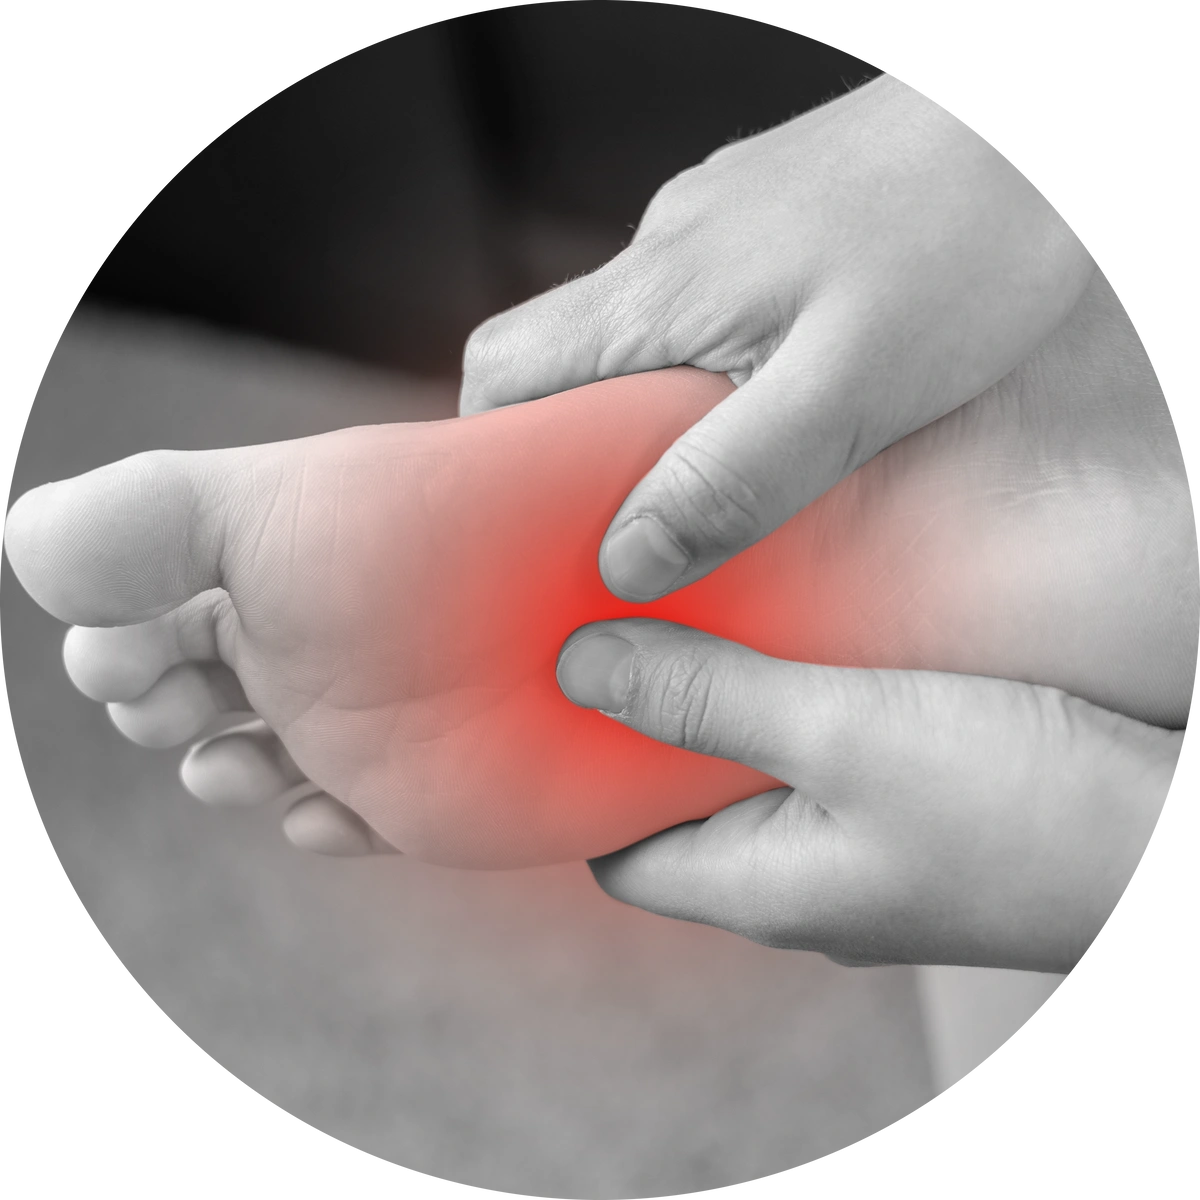 A Complete and Total Overview of Plantar Fasciitis